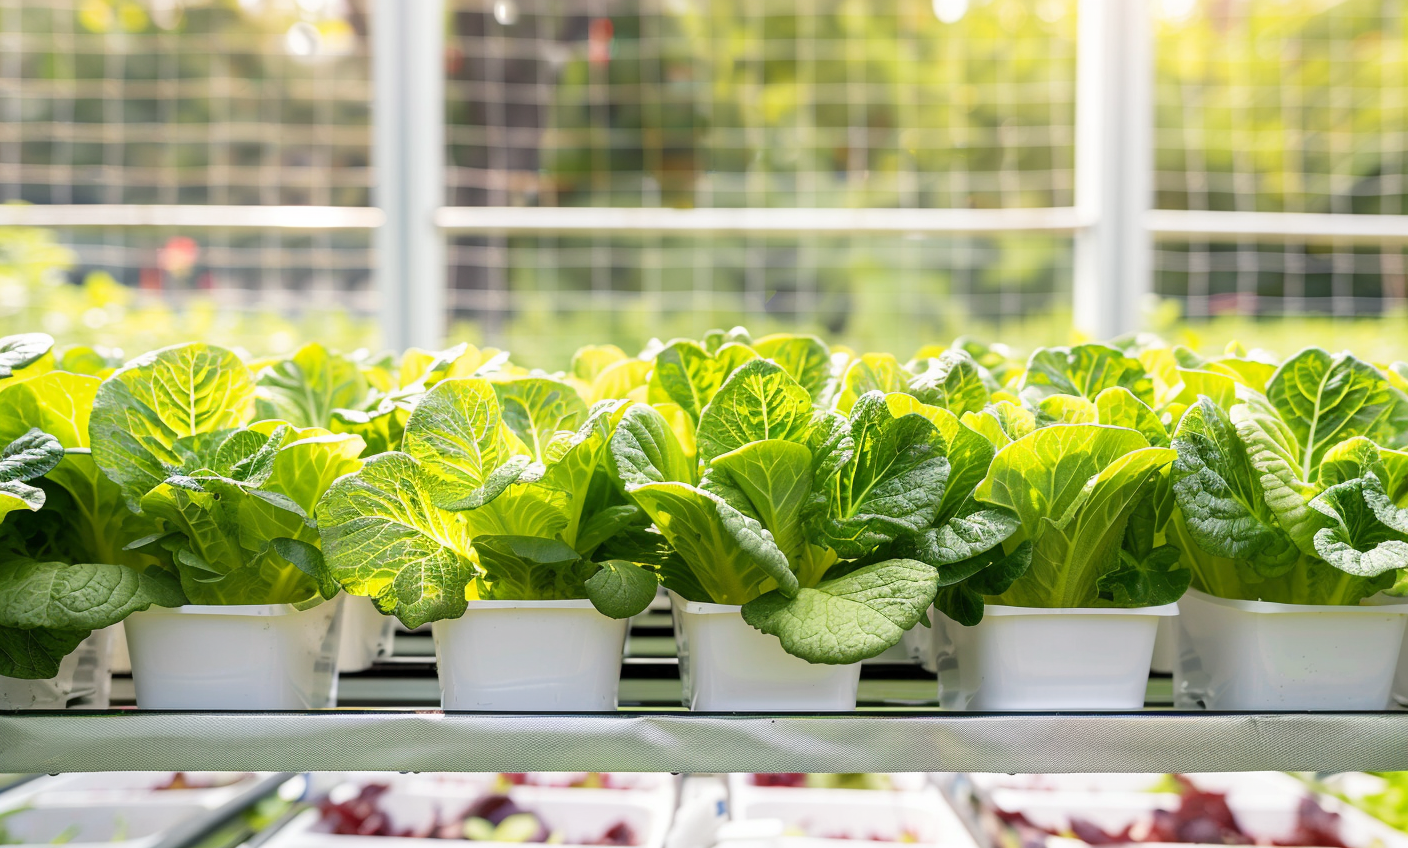 5 Essential Tips for Mastering Crop King Hydroponics for Bountiful Harvests